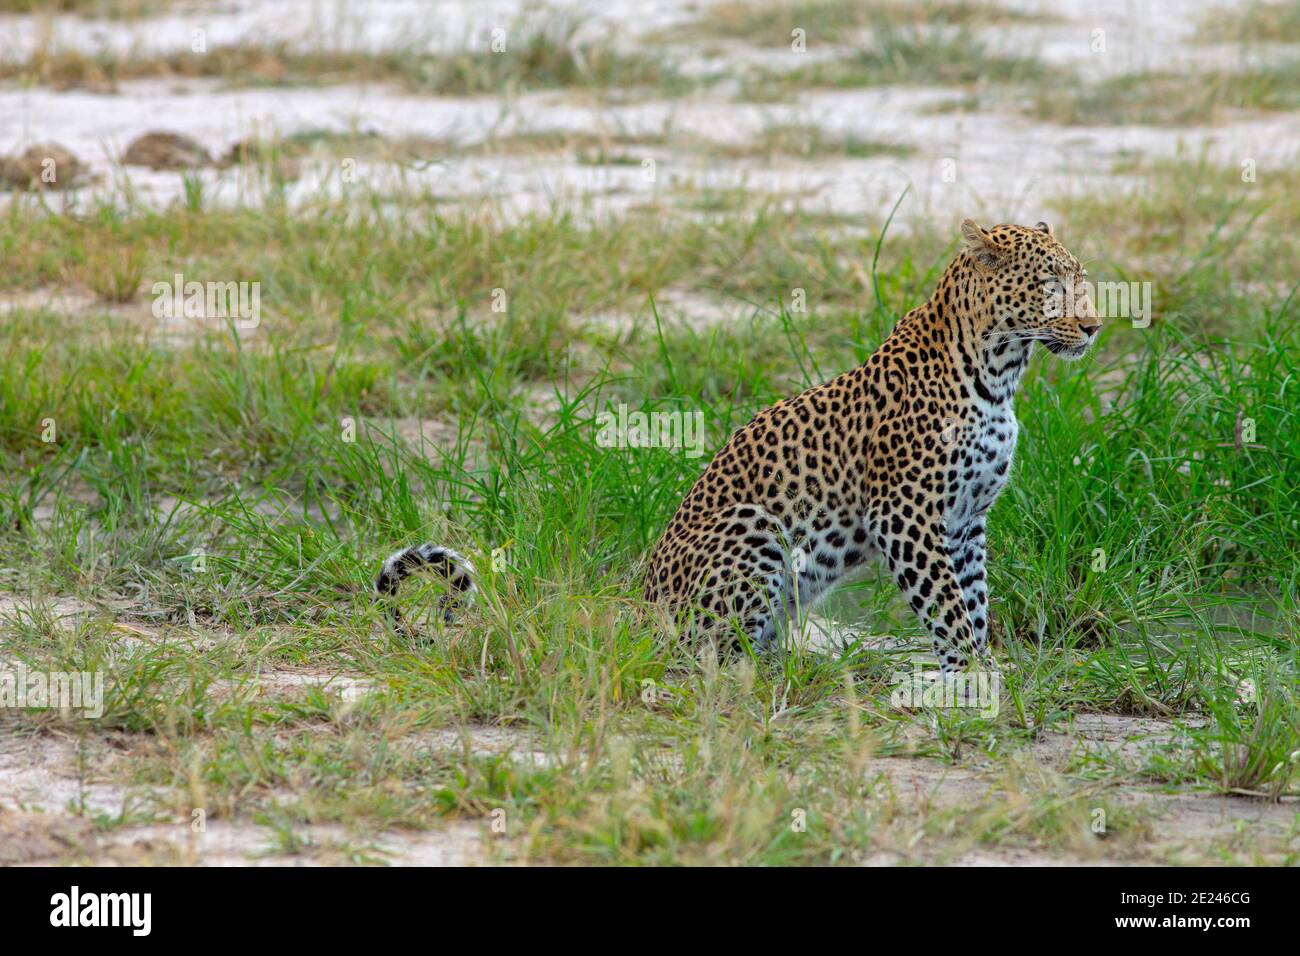 Leopard (Panthera pardus). Sitting alongside a small water hole taking a precautionary viewing around the landscape before reaching down to drink. Stock Photo